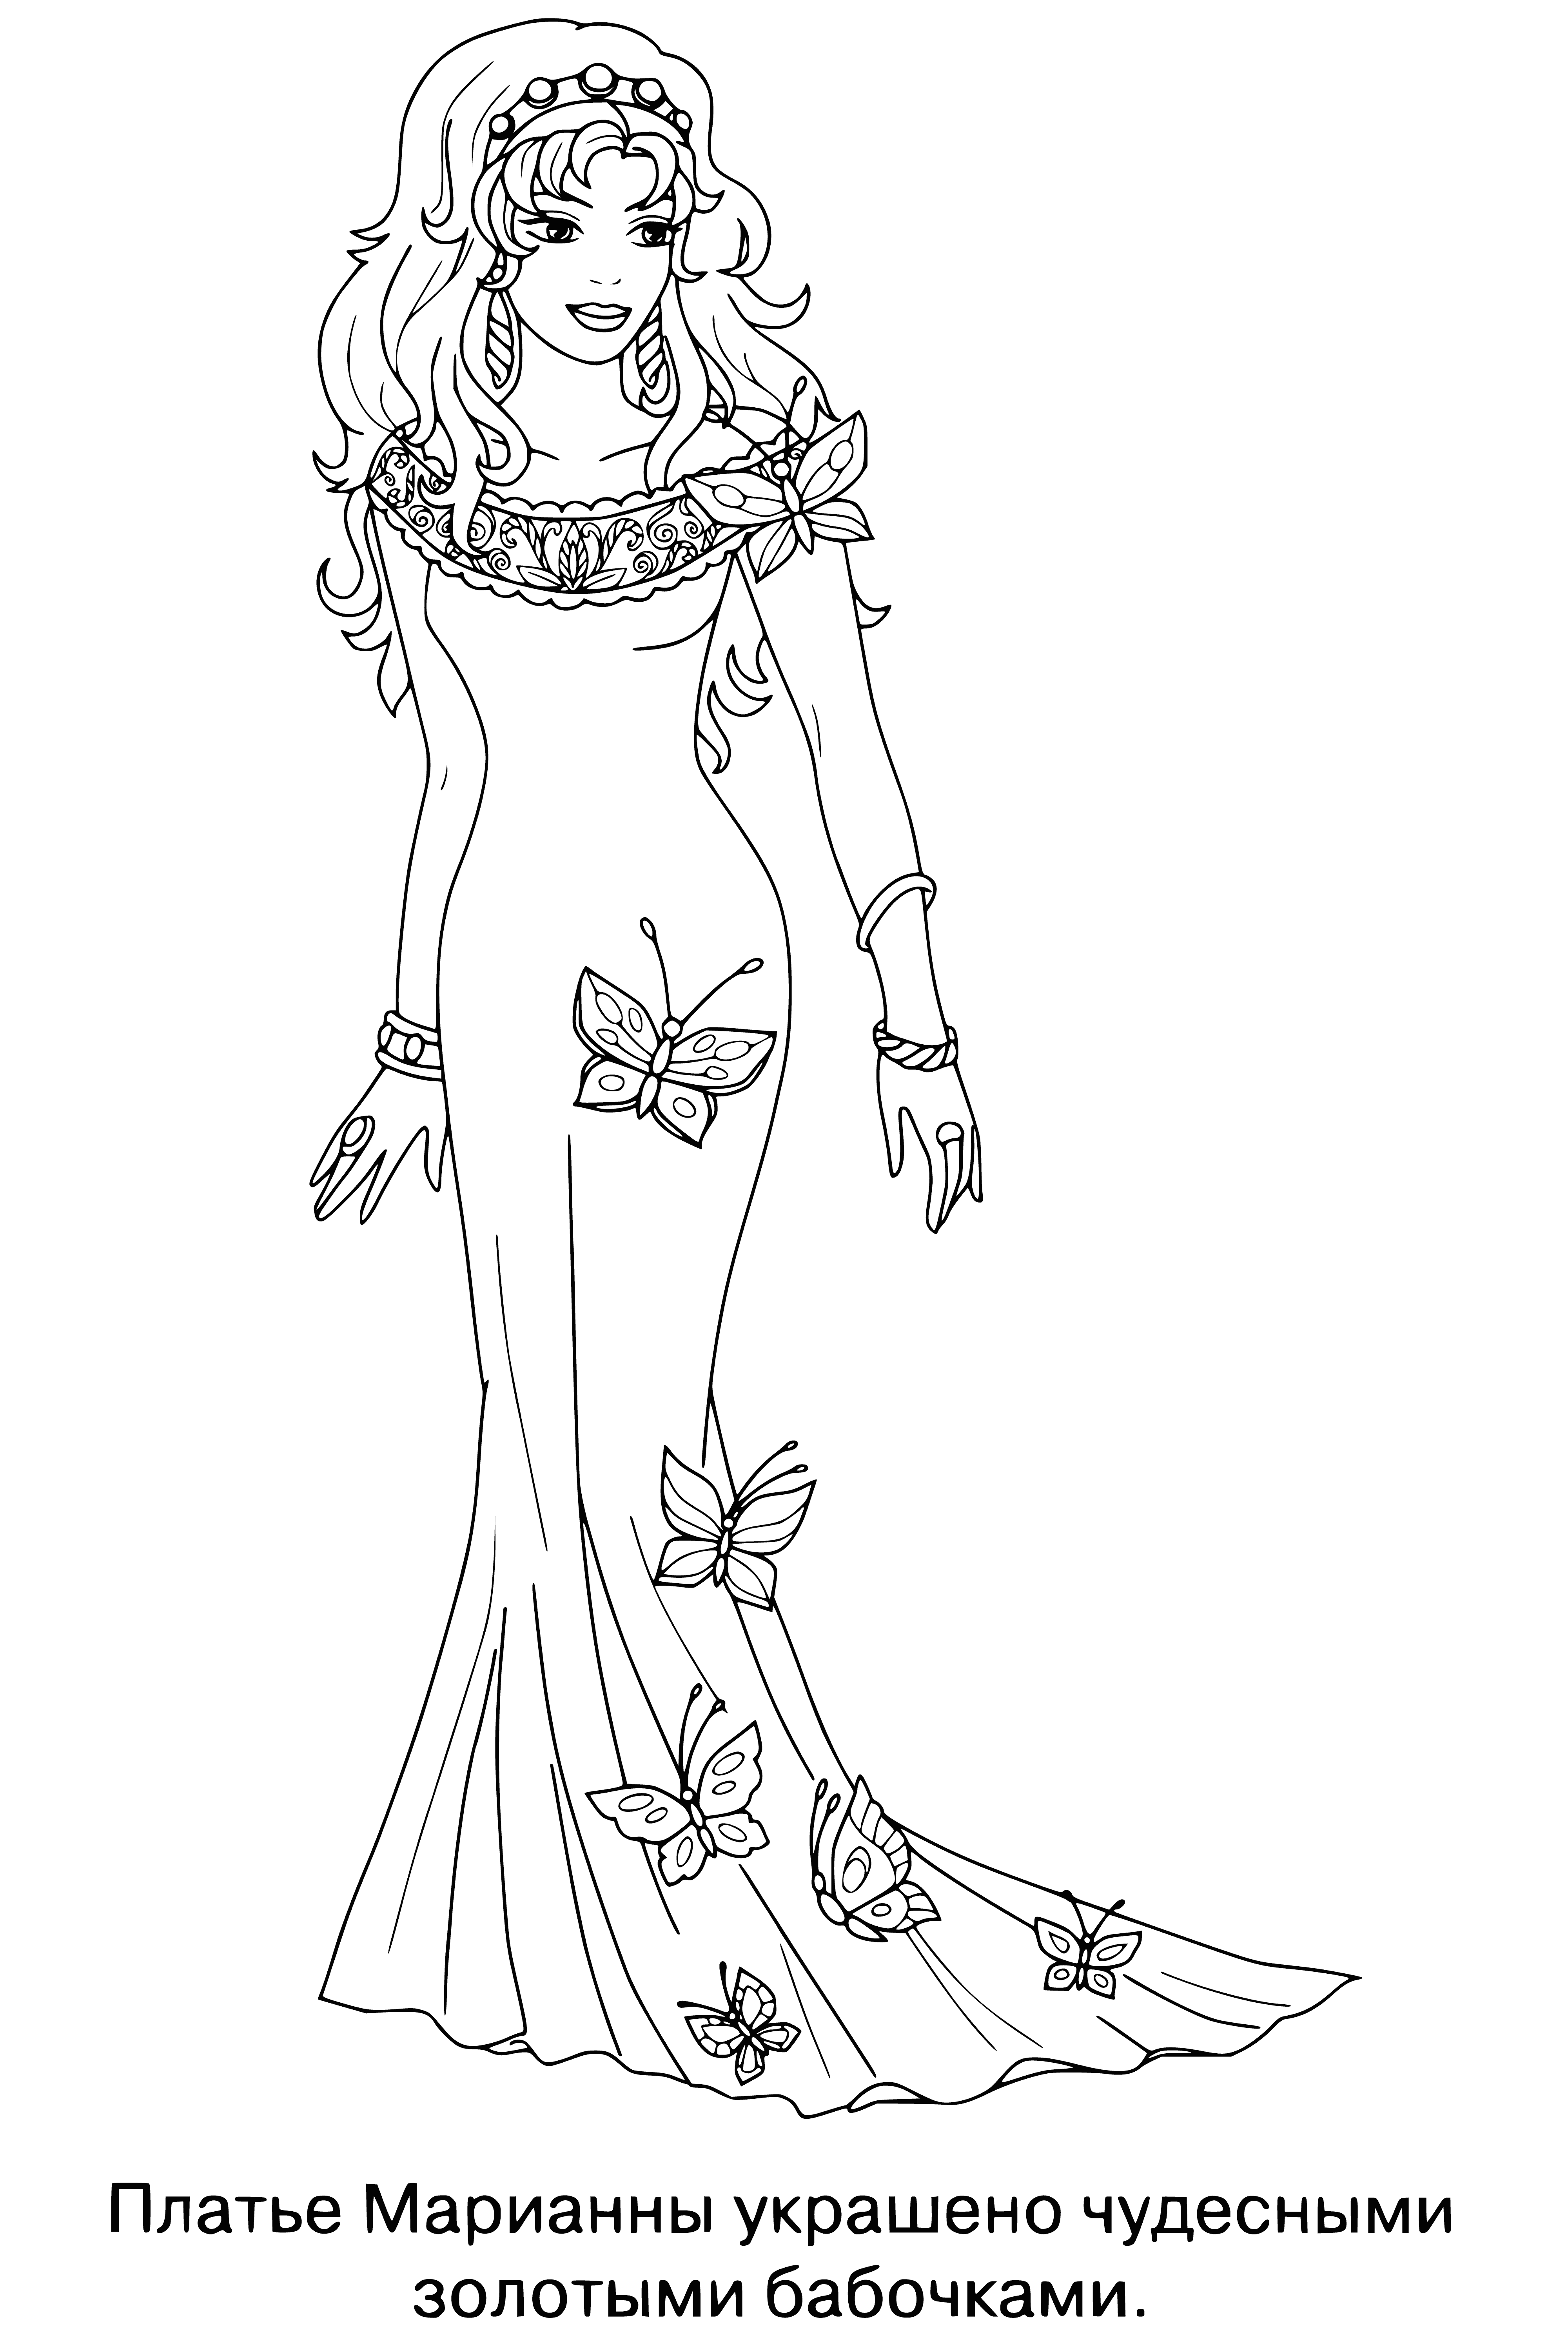 Princess marianne coloring page